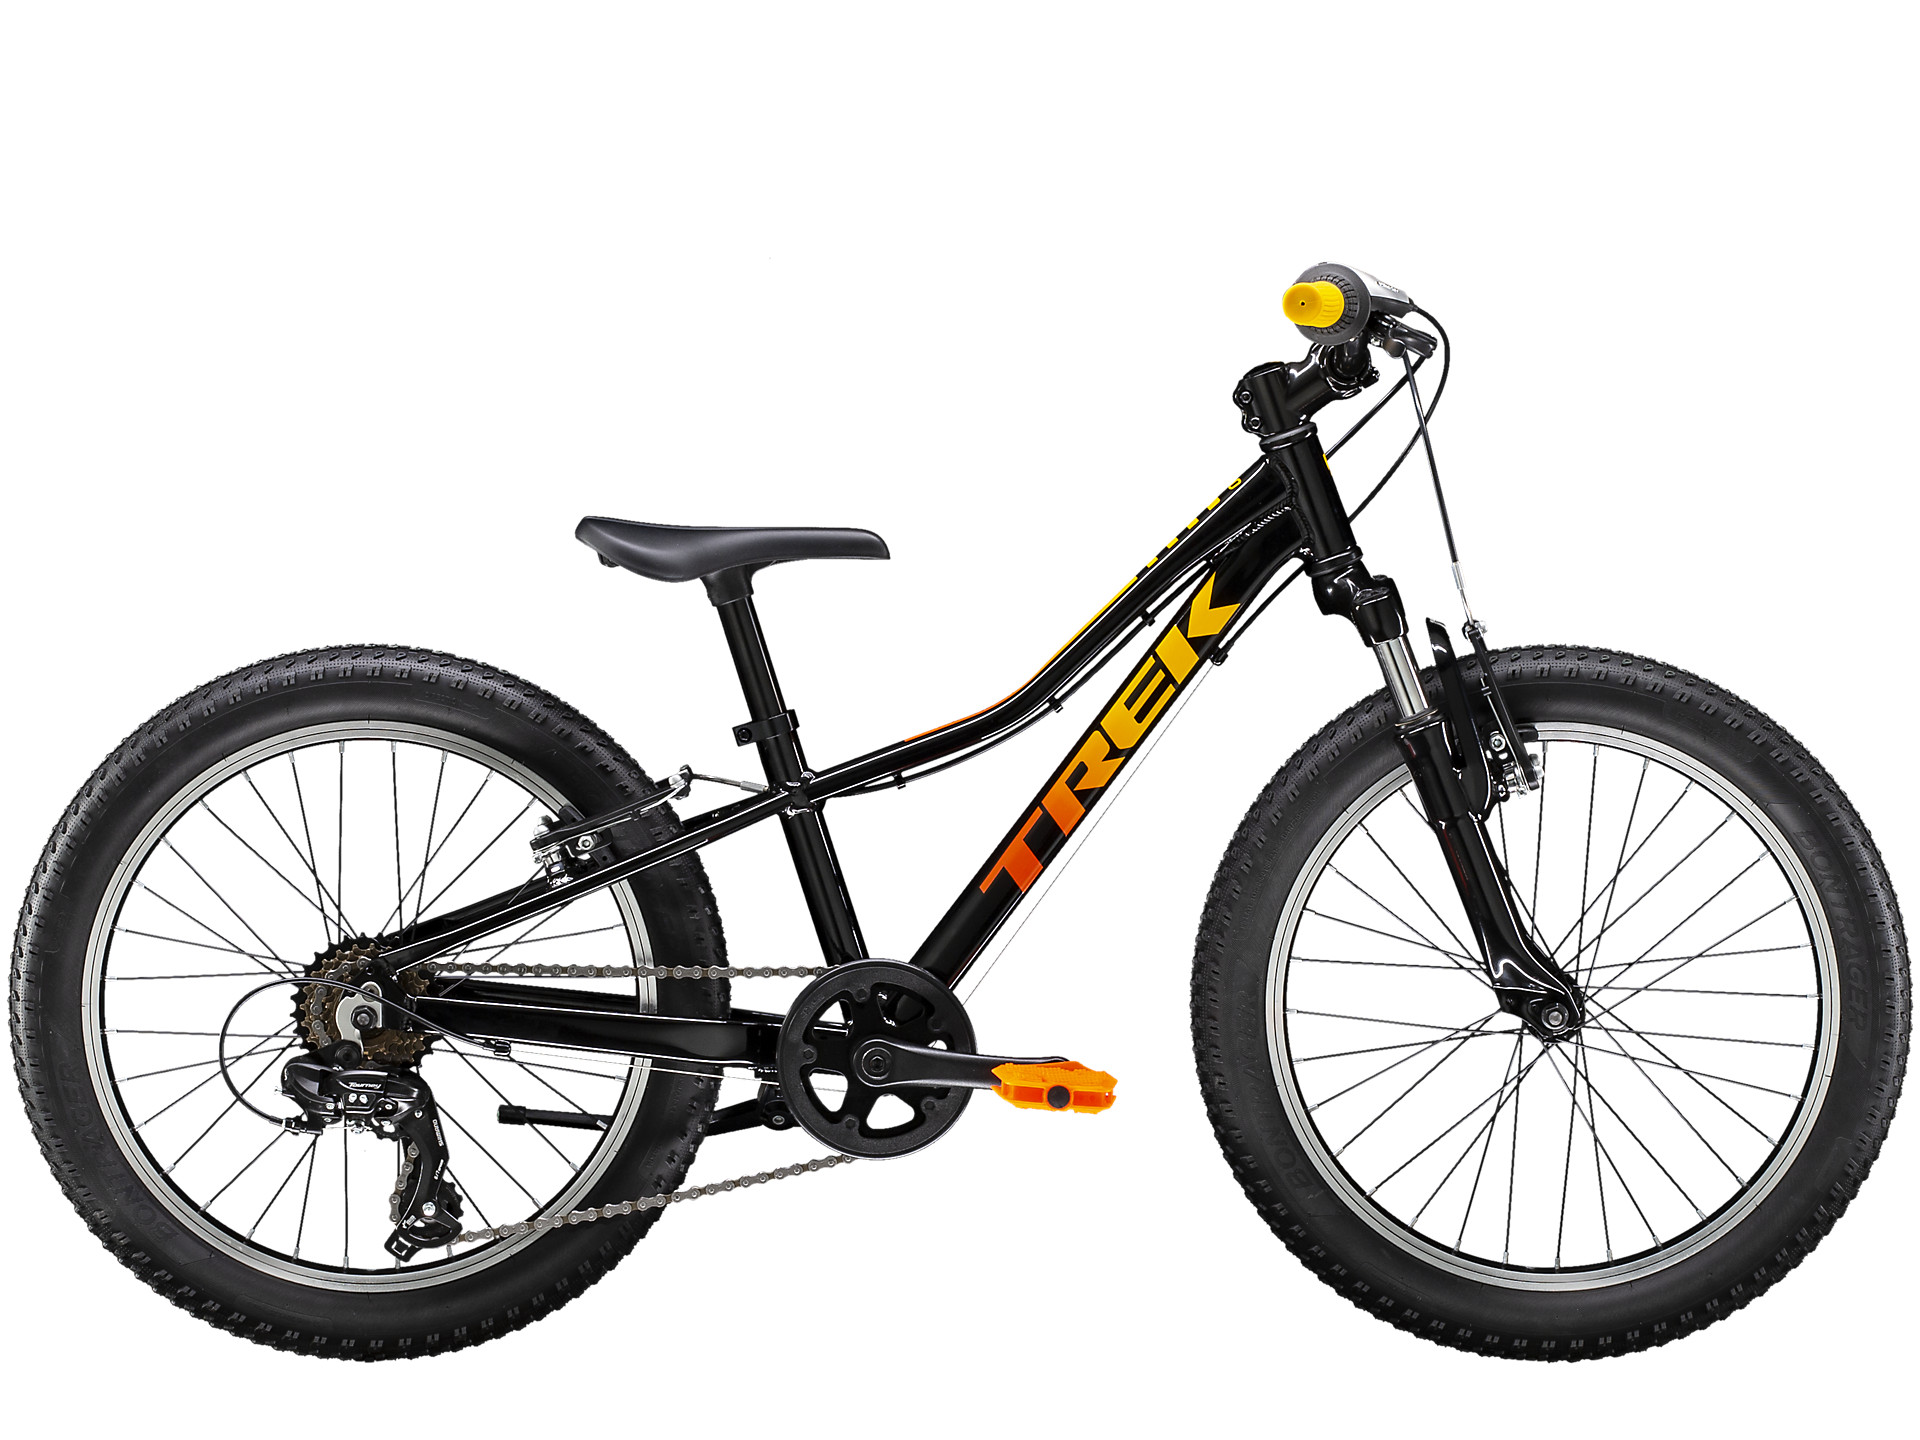 <a href="https://cycles-clement.be/product/precaliber-20-7sp-boys-20-trek-black/">PRECALIBER 20 7SP BOYS 20 TREK BLACK</a>